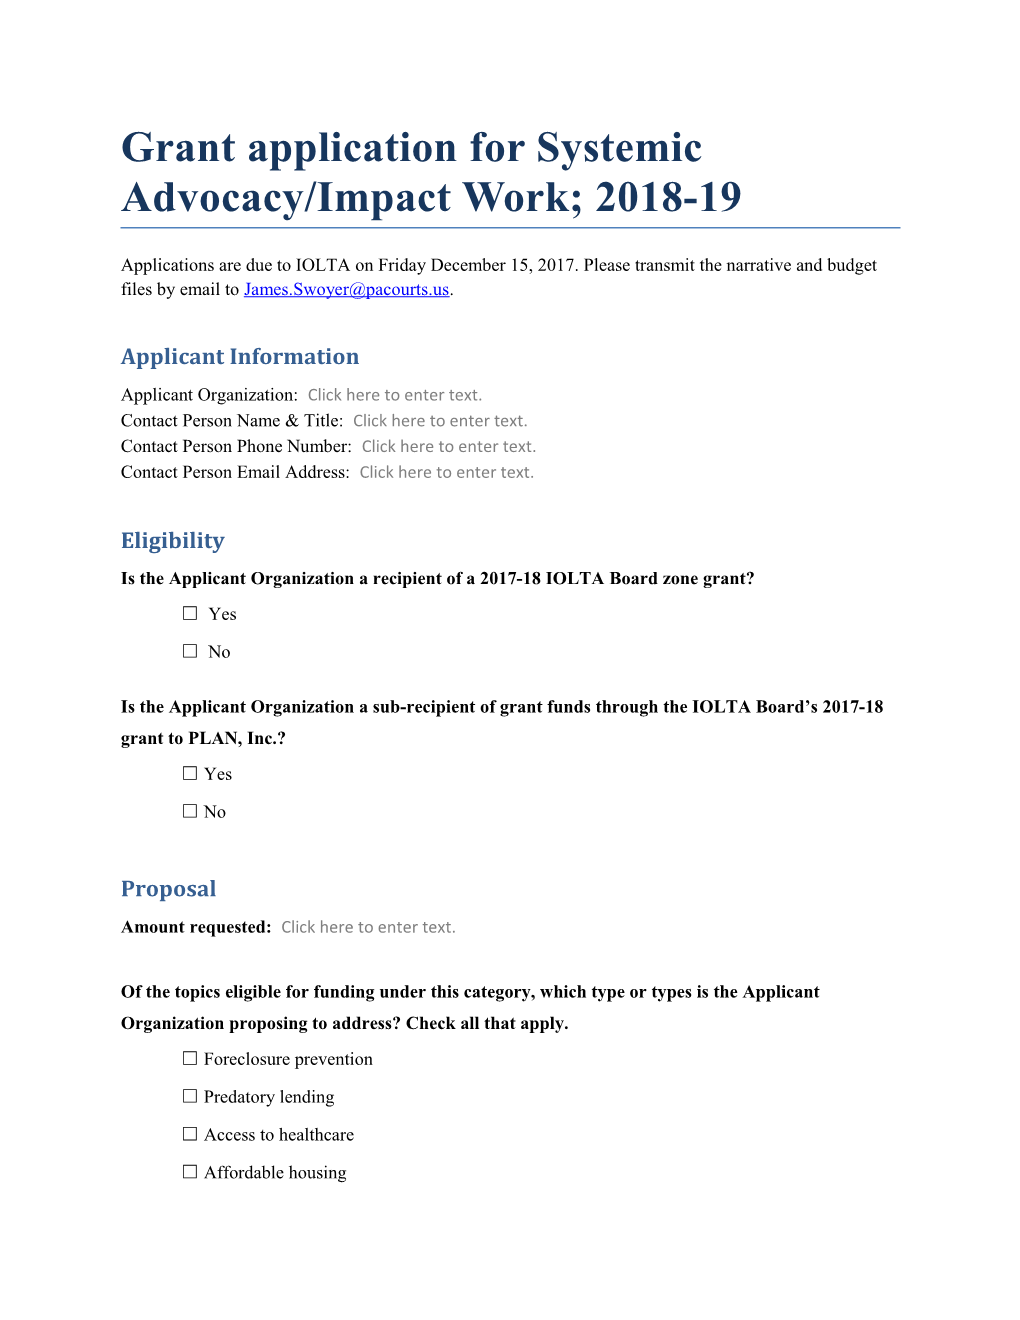 Grant Application for Systemic Advocacy/Impact Work; 2018-19